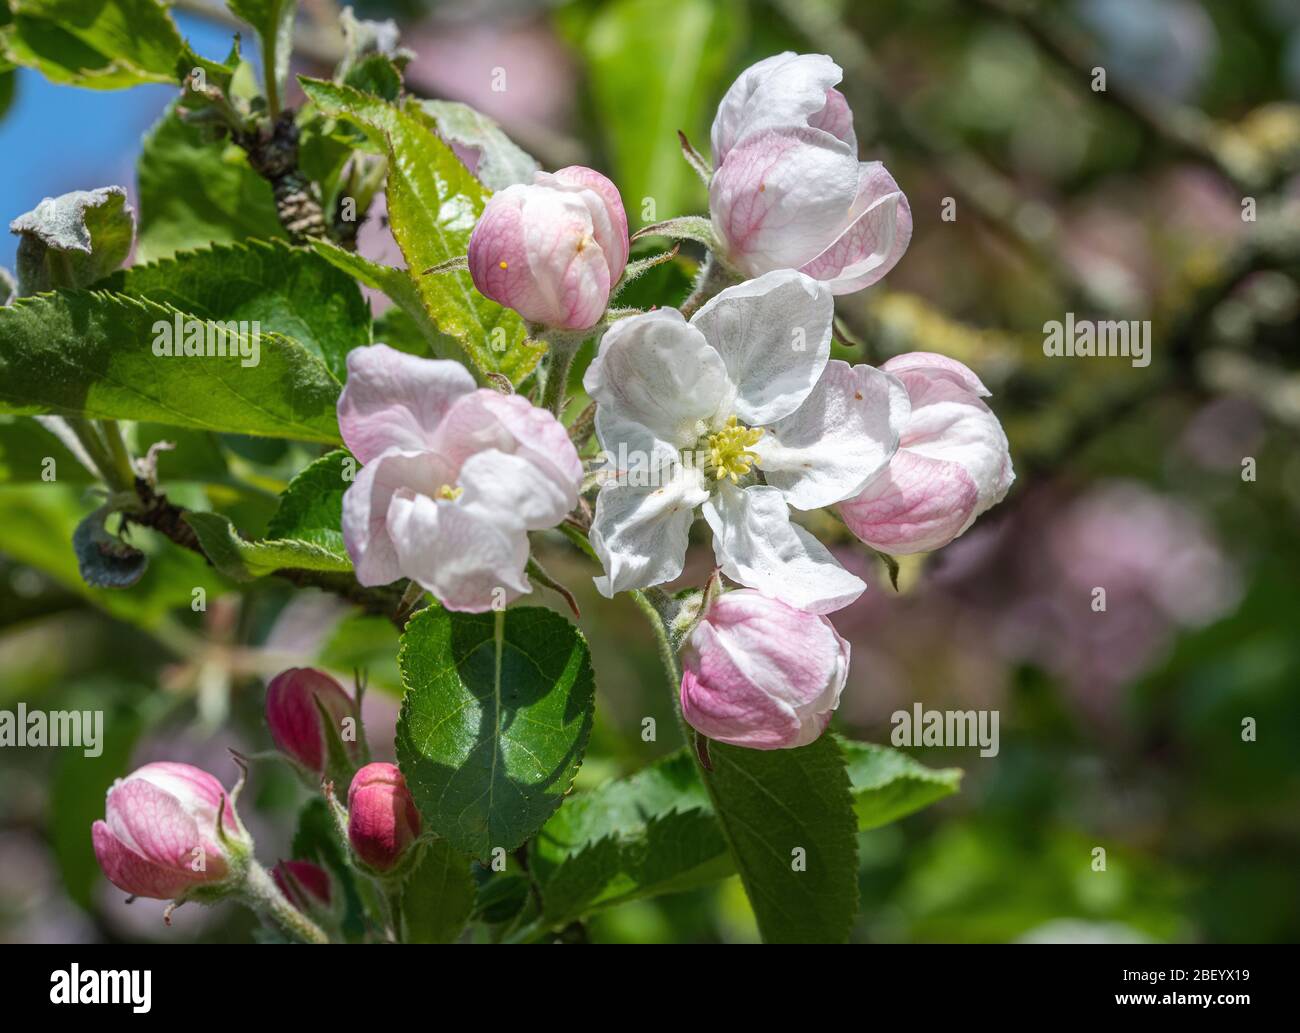 Beautiful Crabapple Blossom on a Crab Apple Tree in a Garden in Alsager Cheshire England United Kingdom UK Stock Photo